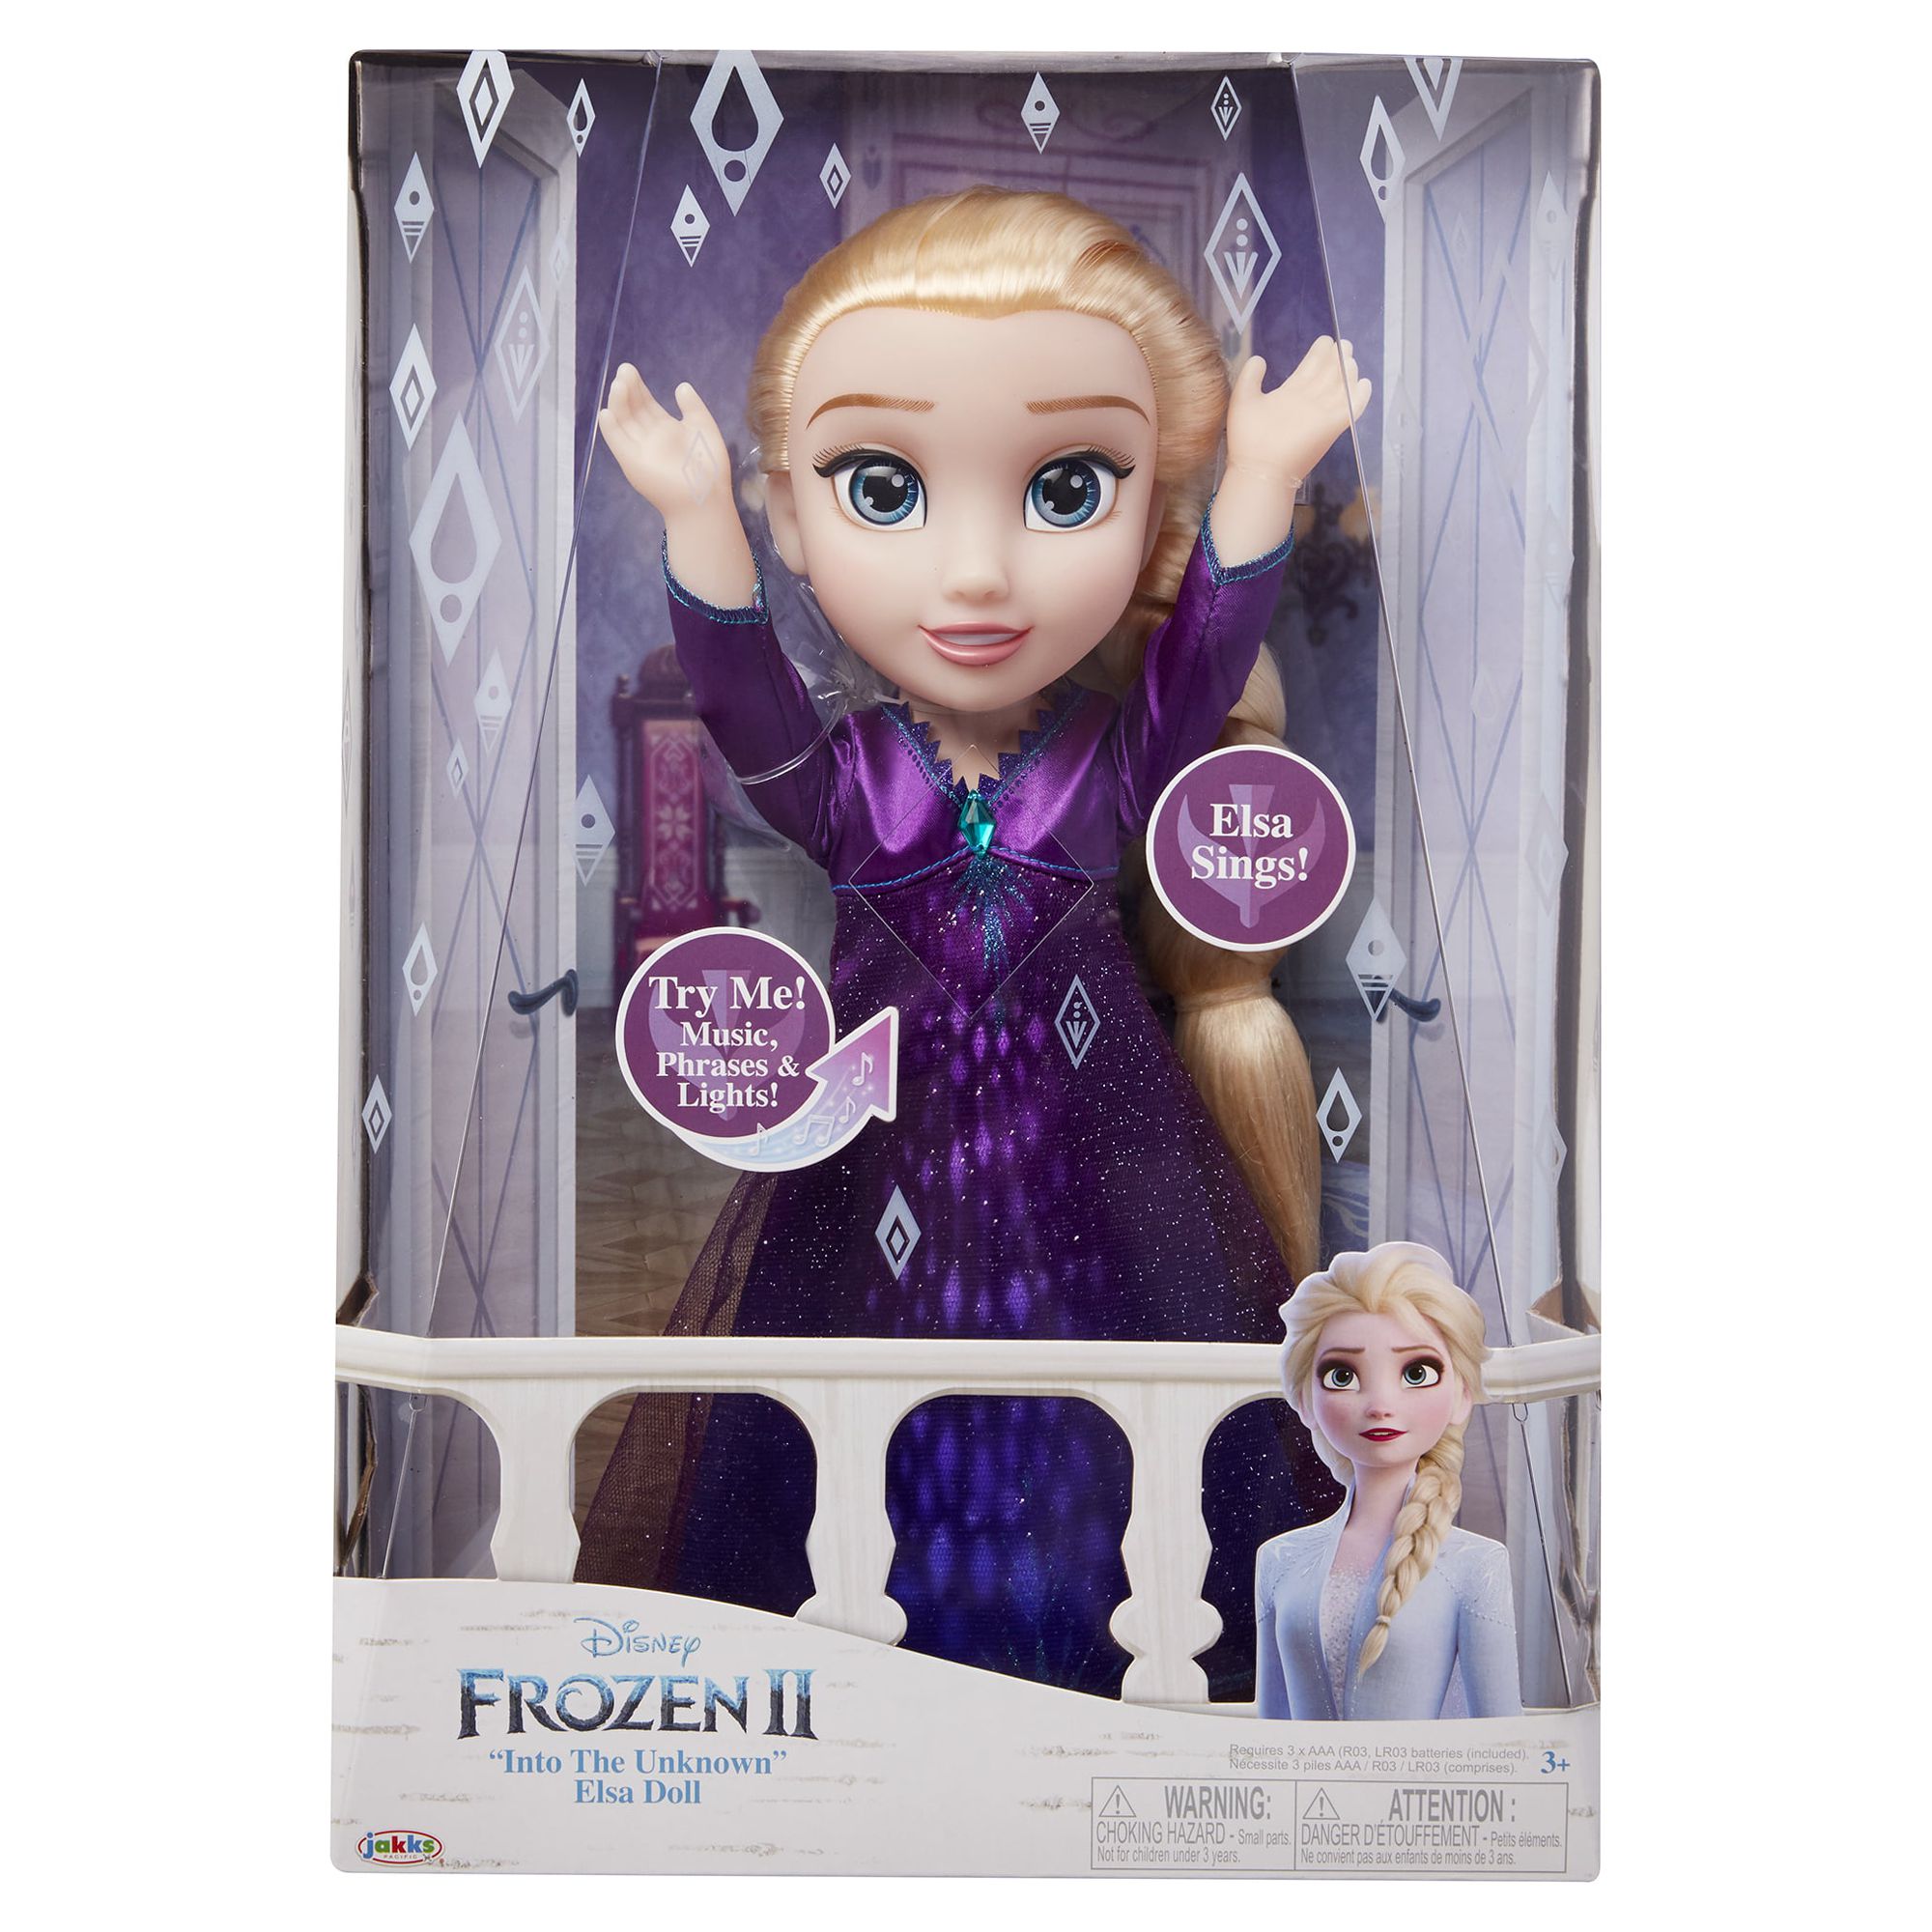 Disney Frozen 207031-V1 2 Elsa Musical Doll Sings Into the Unknown, Features 14 Film Phrases, 14" - image 2 of 10